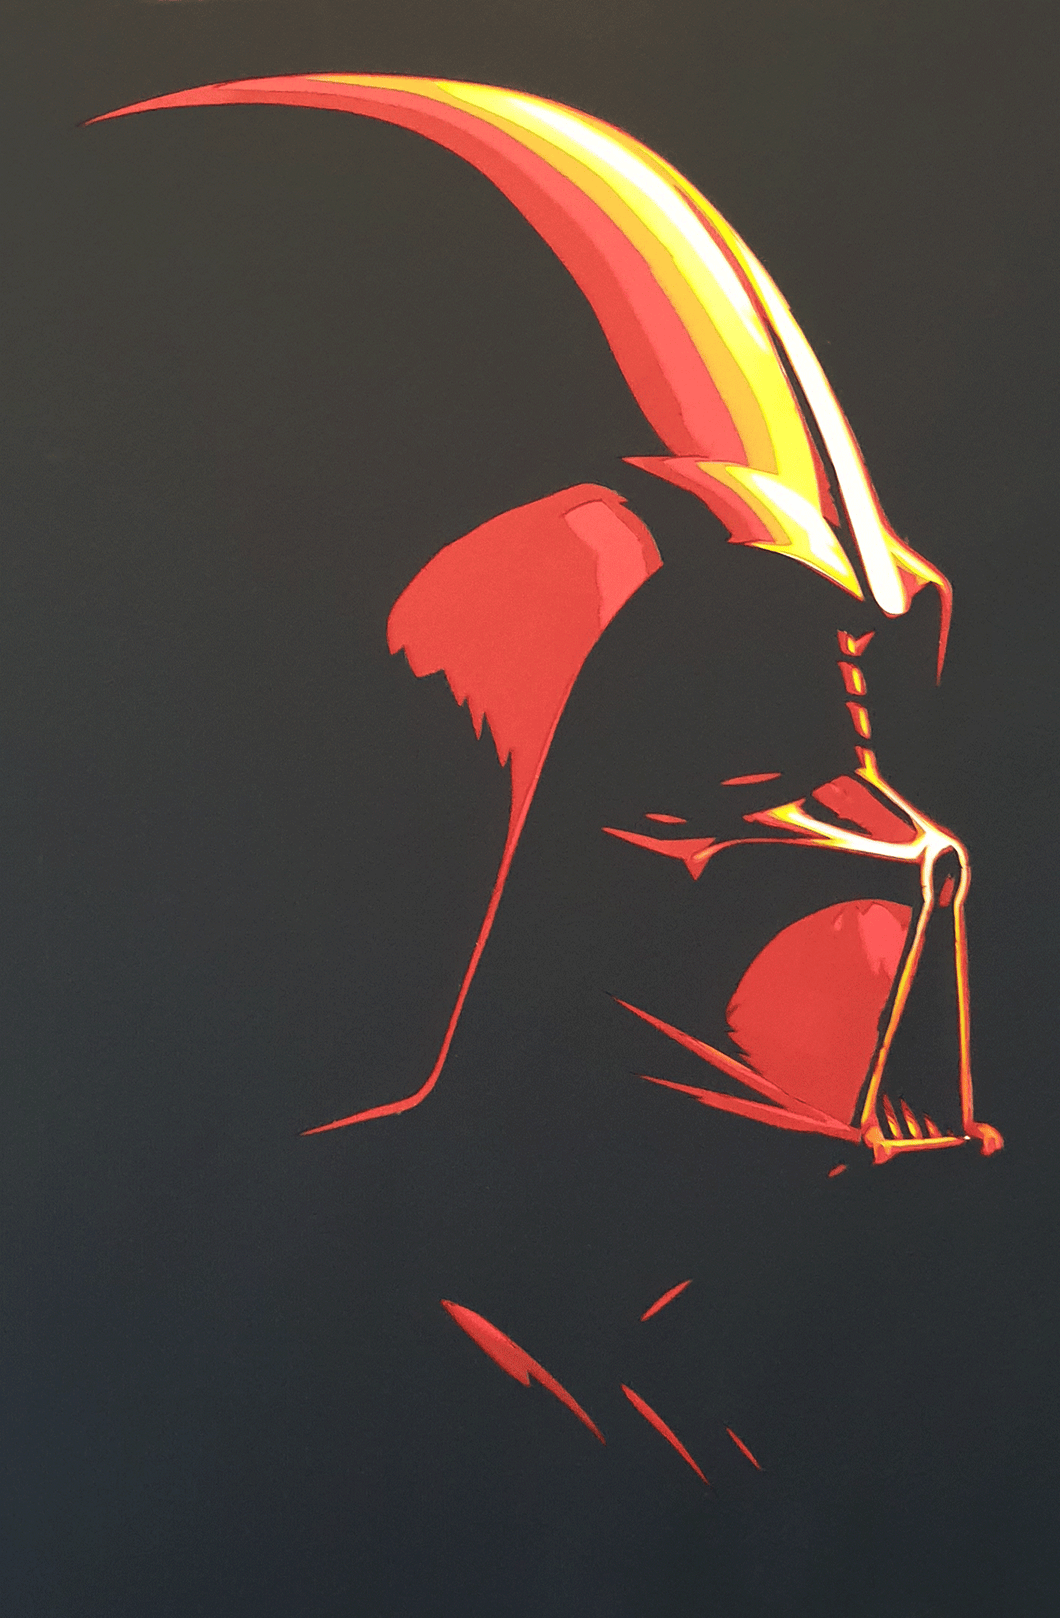 Darth Vader Fire Version by Rick Sharif  [A3 Size (297 x 420 mm) (11.7 x 16.5 in)]